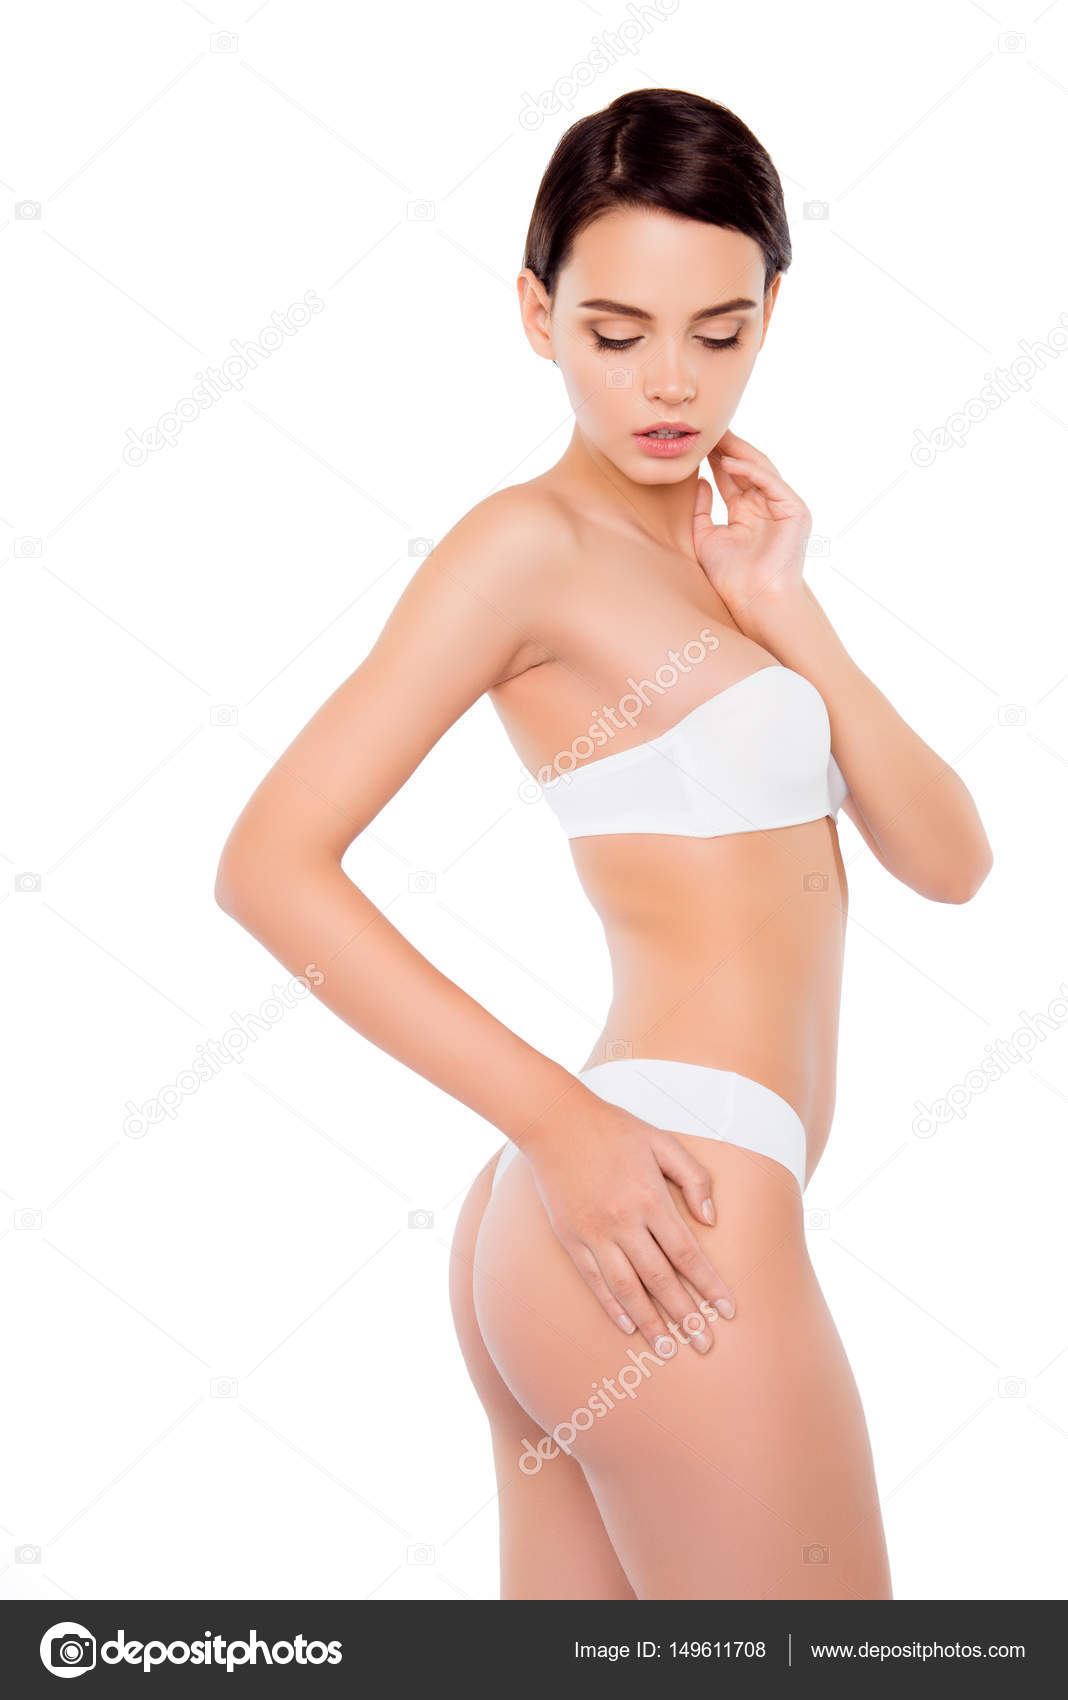 Young Slim Woman Taking Off White Panties. Stock Photo - Image of